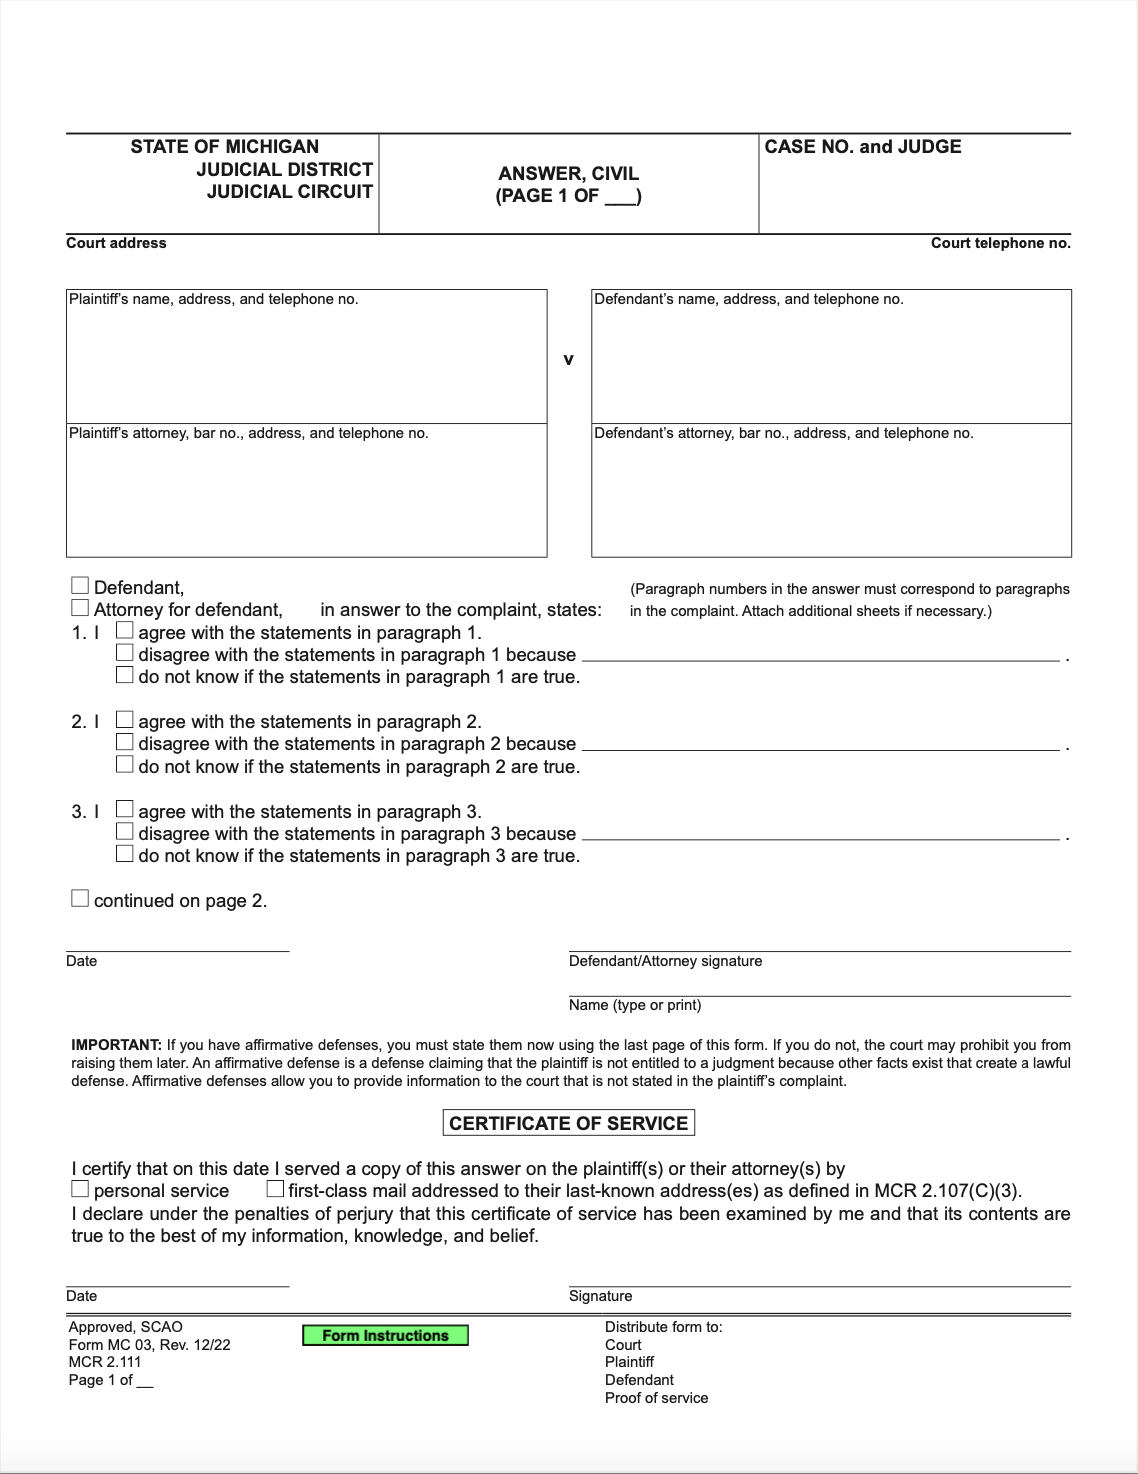 Image of the first page of a Michigan Answer Form for a civl case